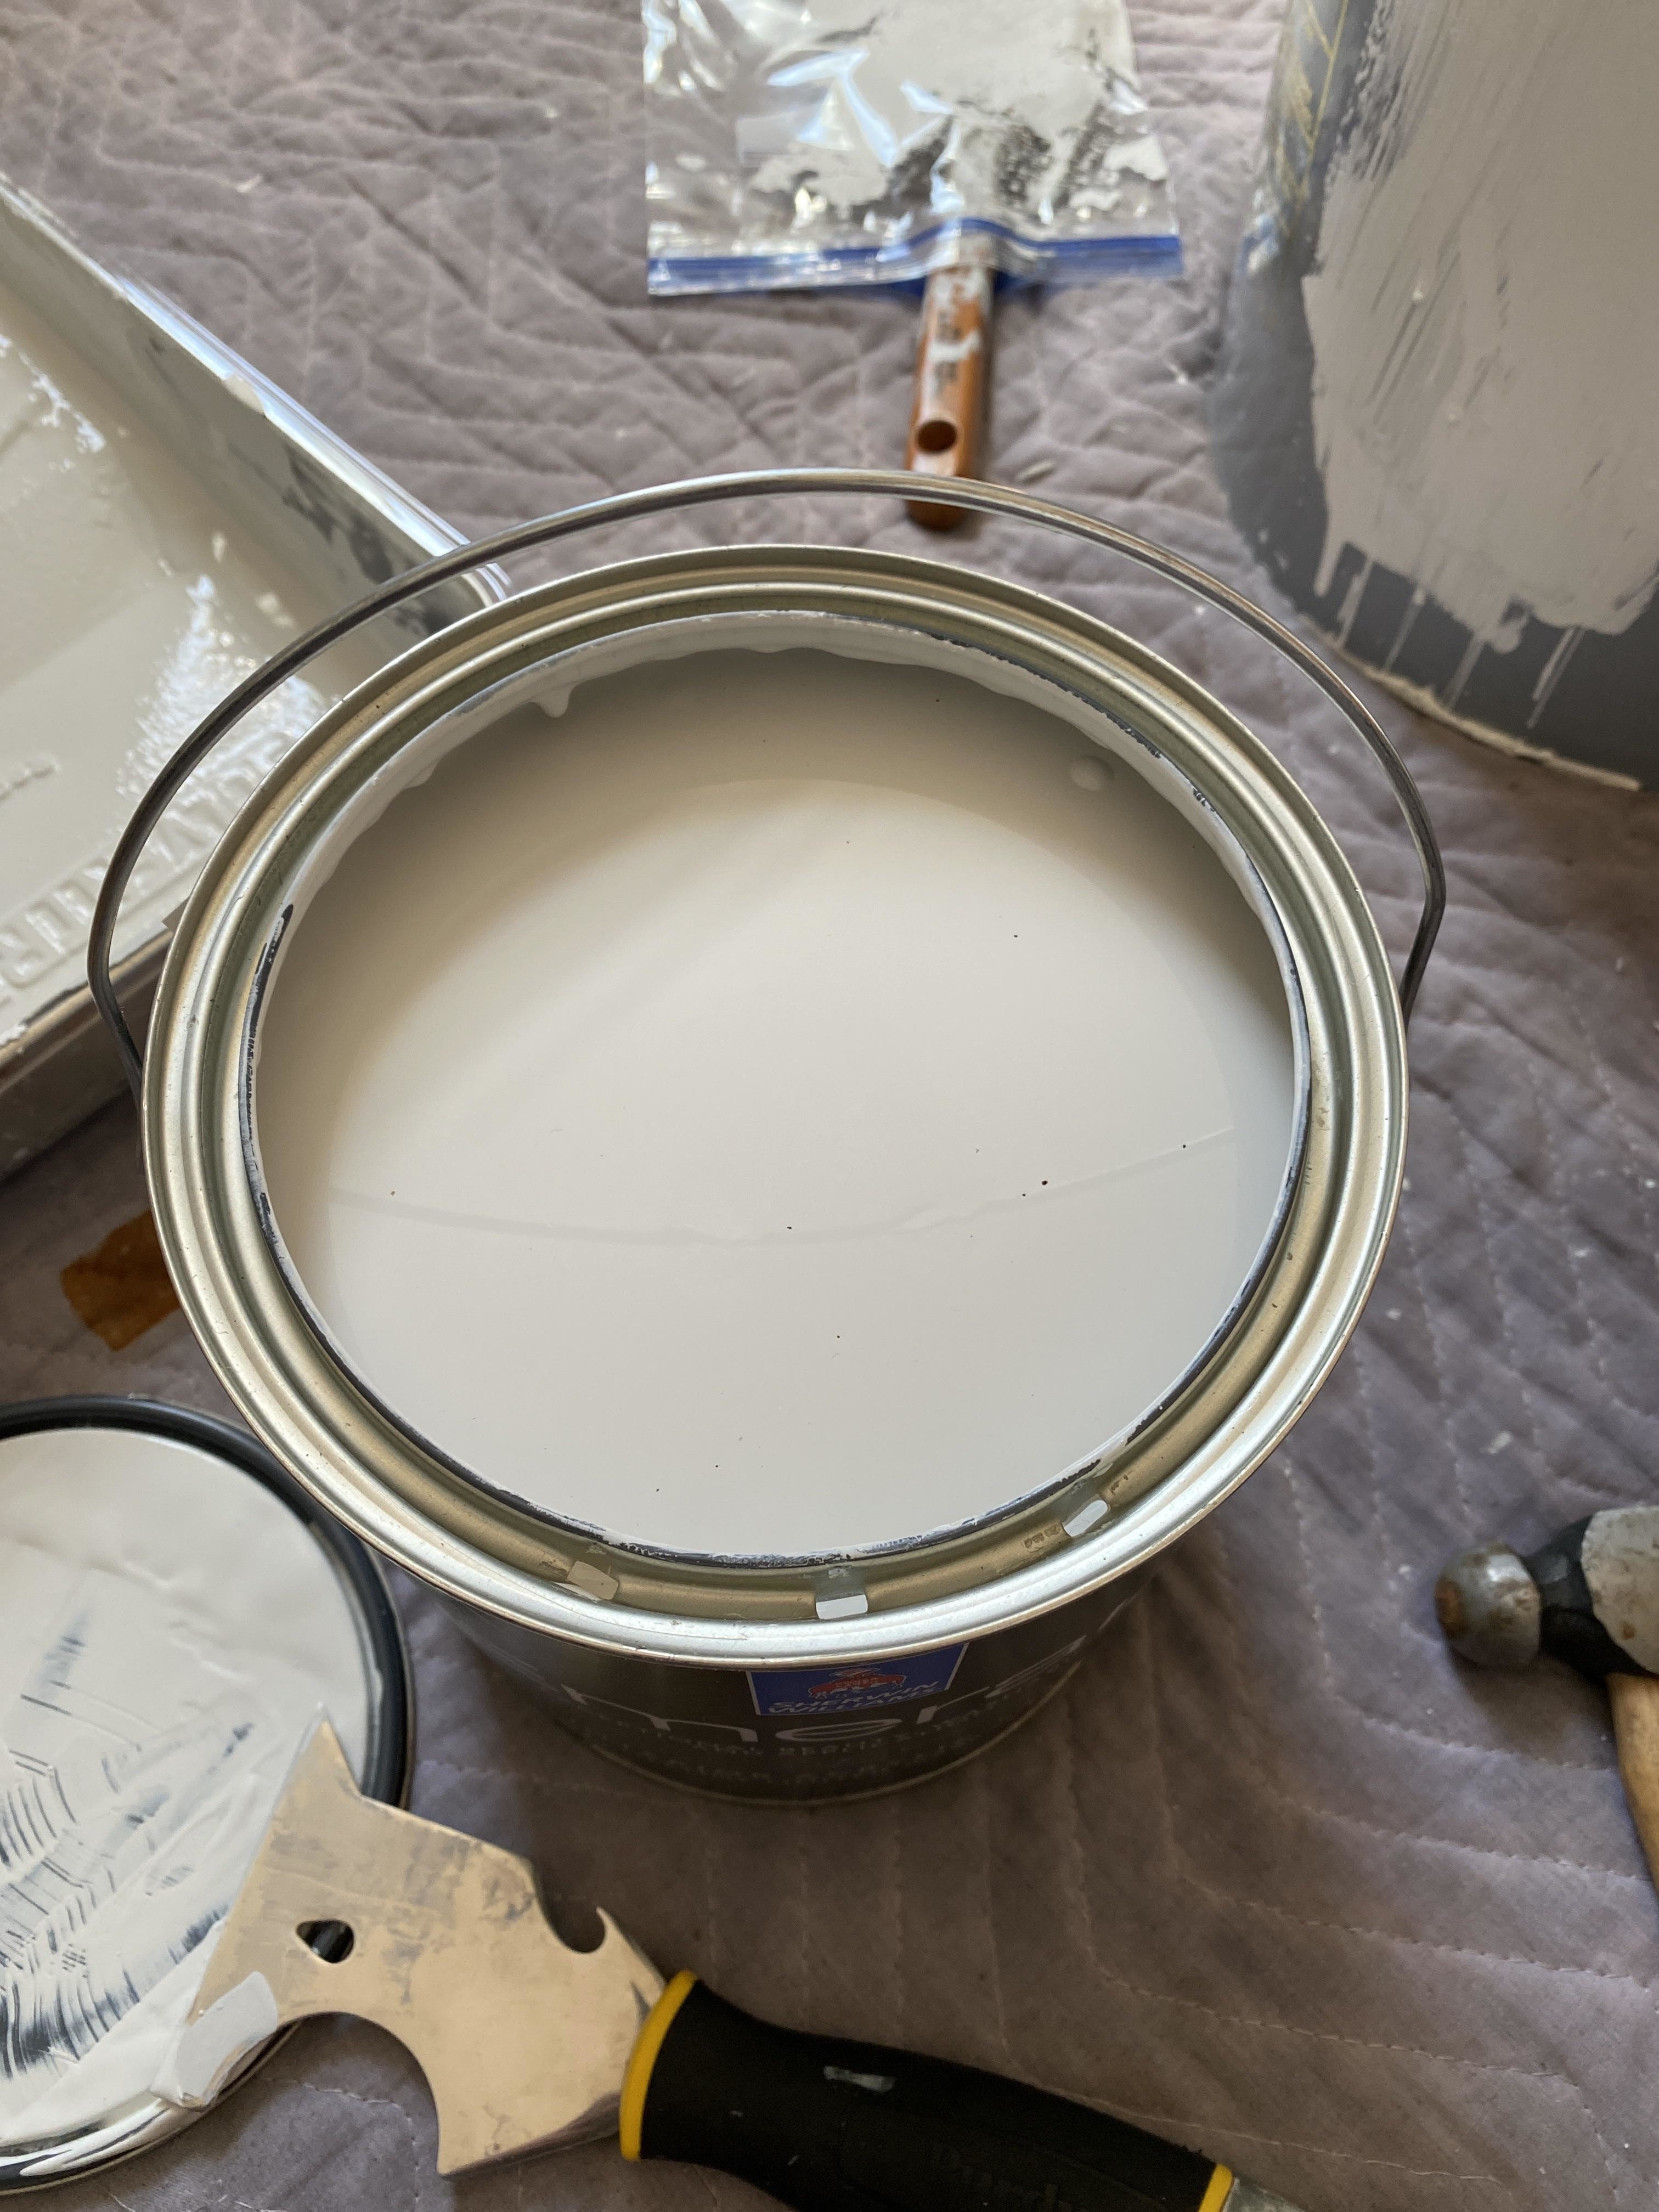 A top-down view of a paint can filled with white paint